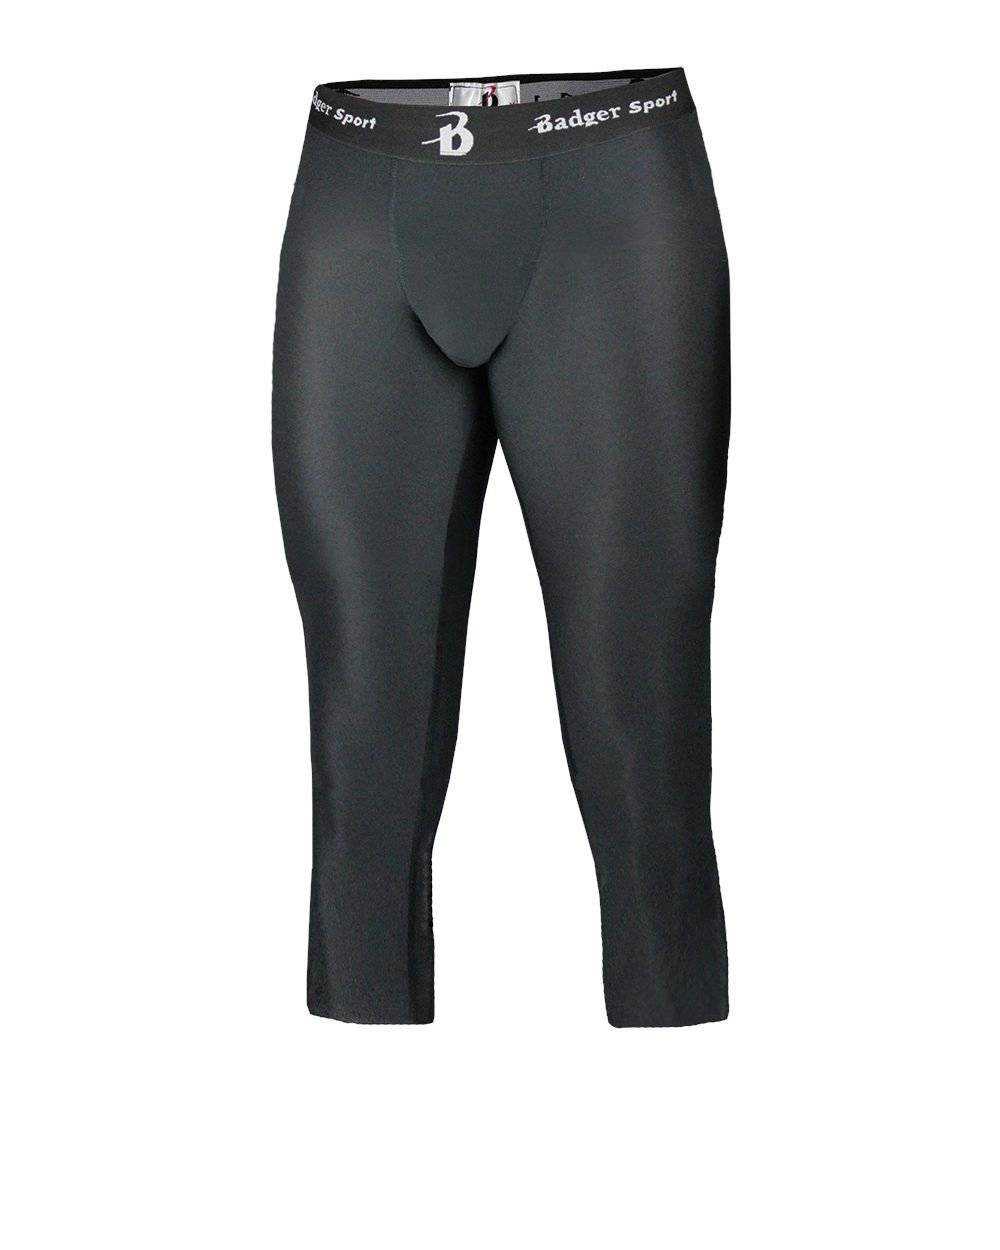 Badger Sport 2611 Calf Length Youth Compression Tight - Black - HIT a Double - 1